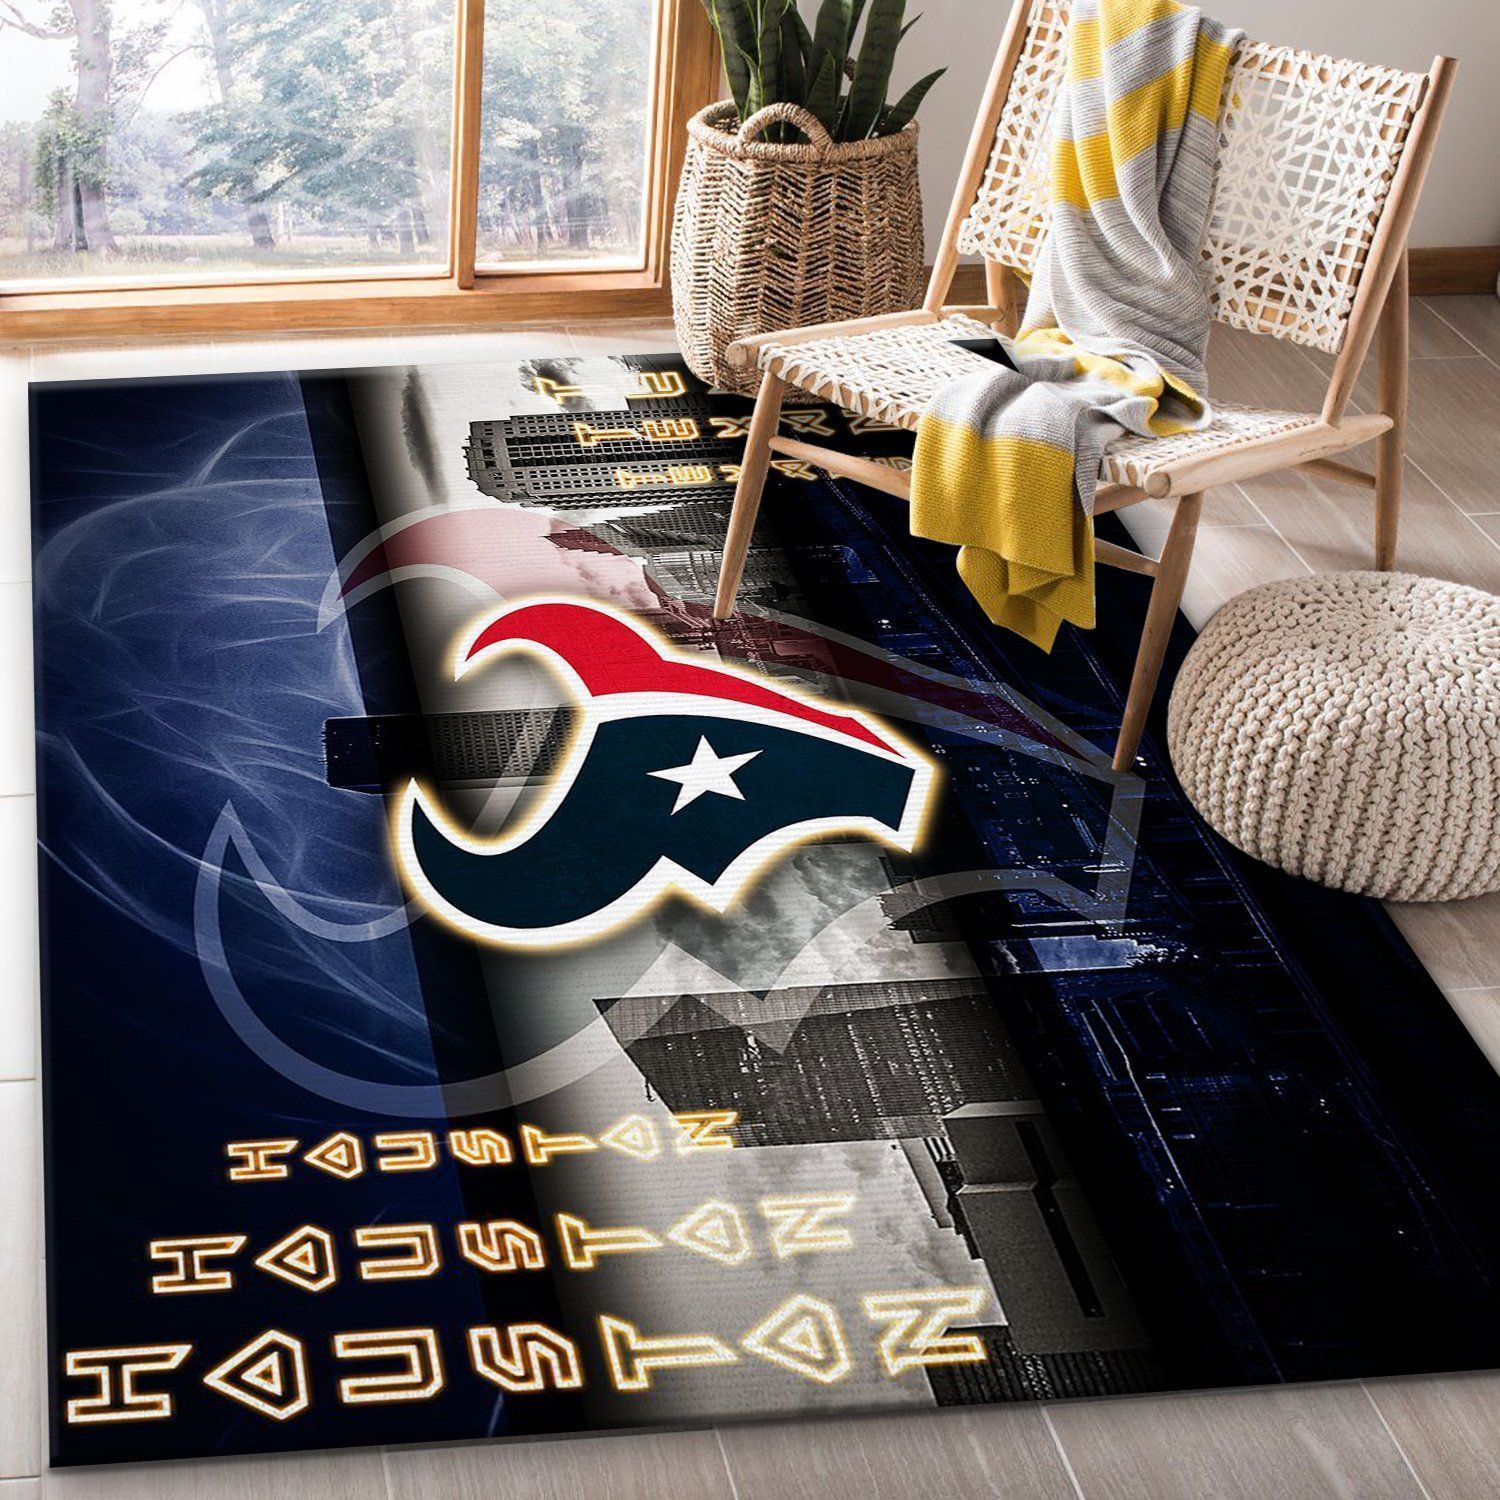 Houston Texans Nfl Area Rug For Christmas Bedroom Rug Home US Decor - Indoor Outdoor Rugs